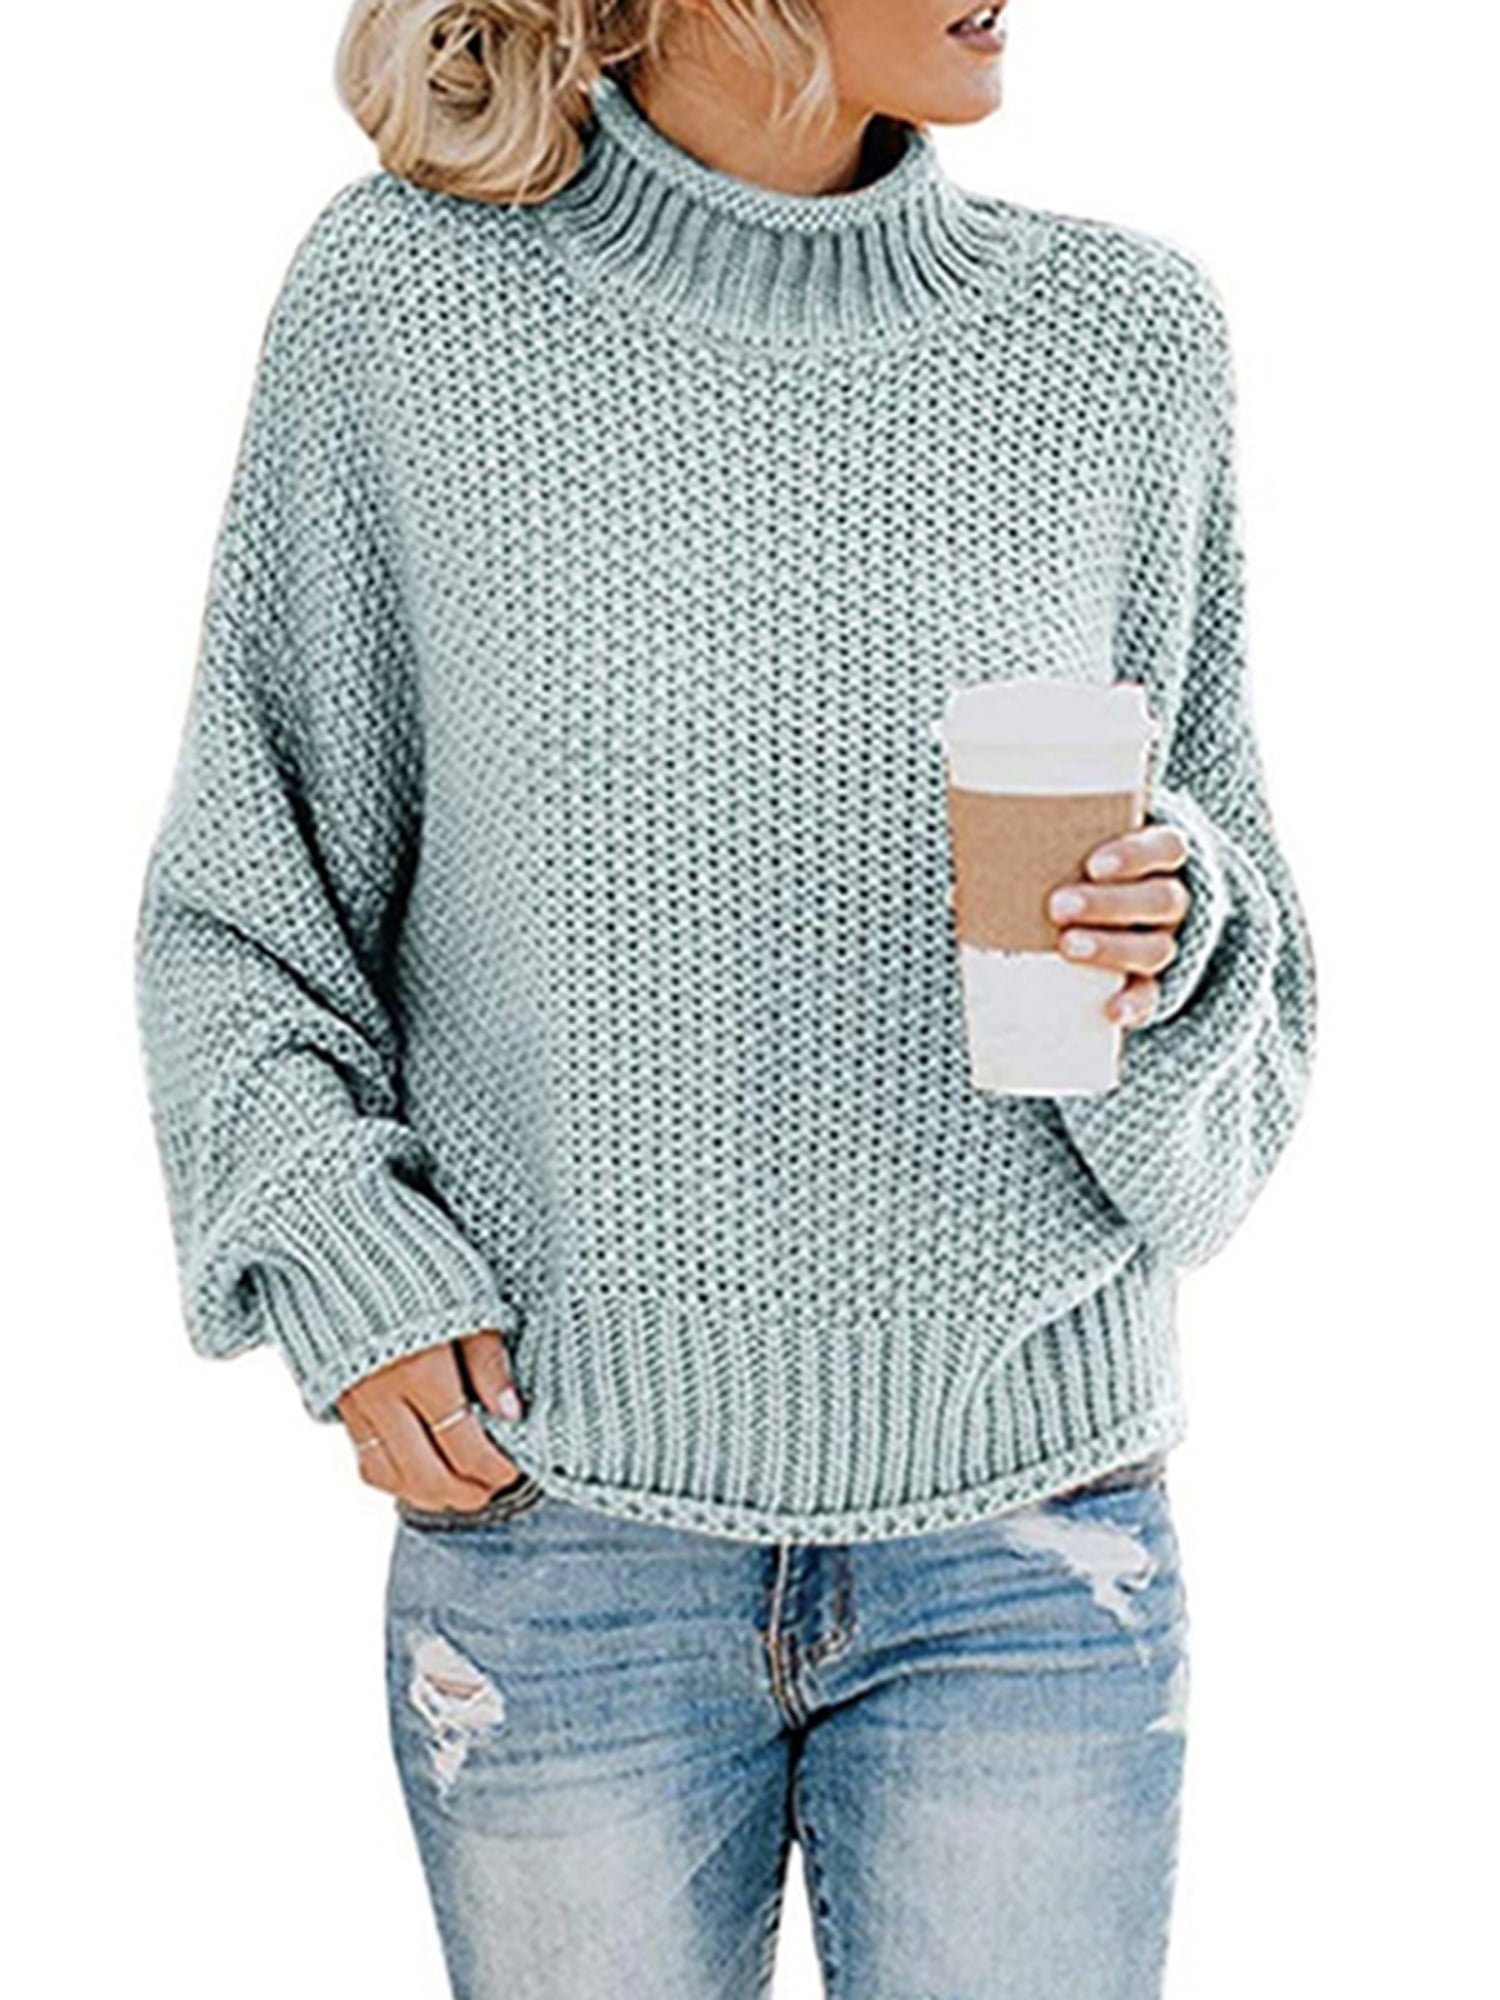 Women's Long Sleeve Sweaters Turtleneck Loose Soft Knitted Casual